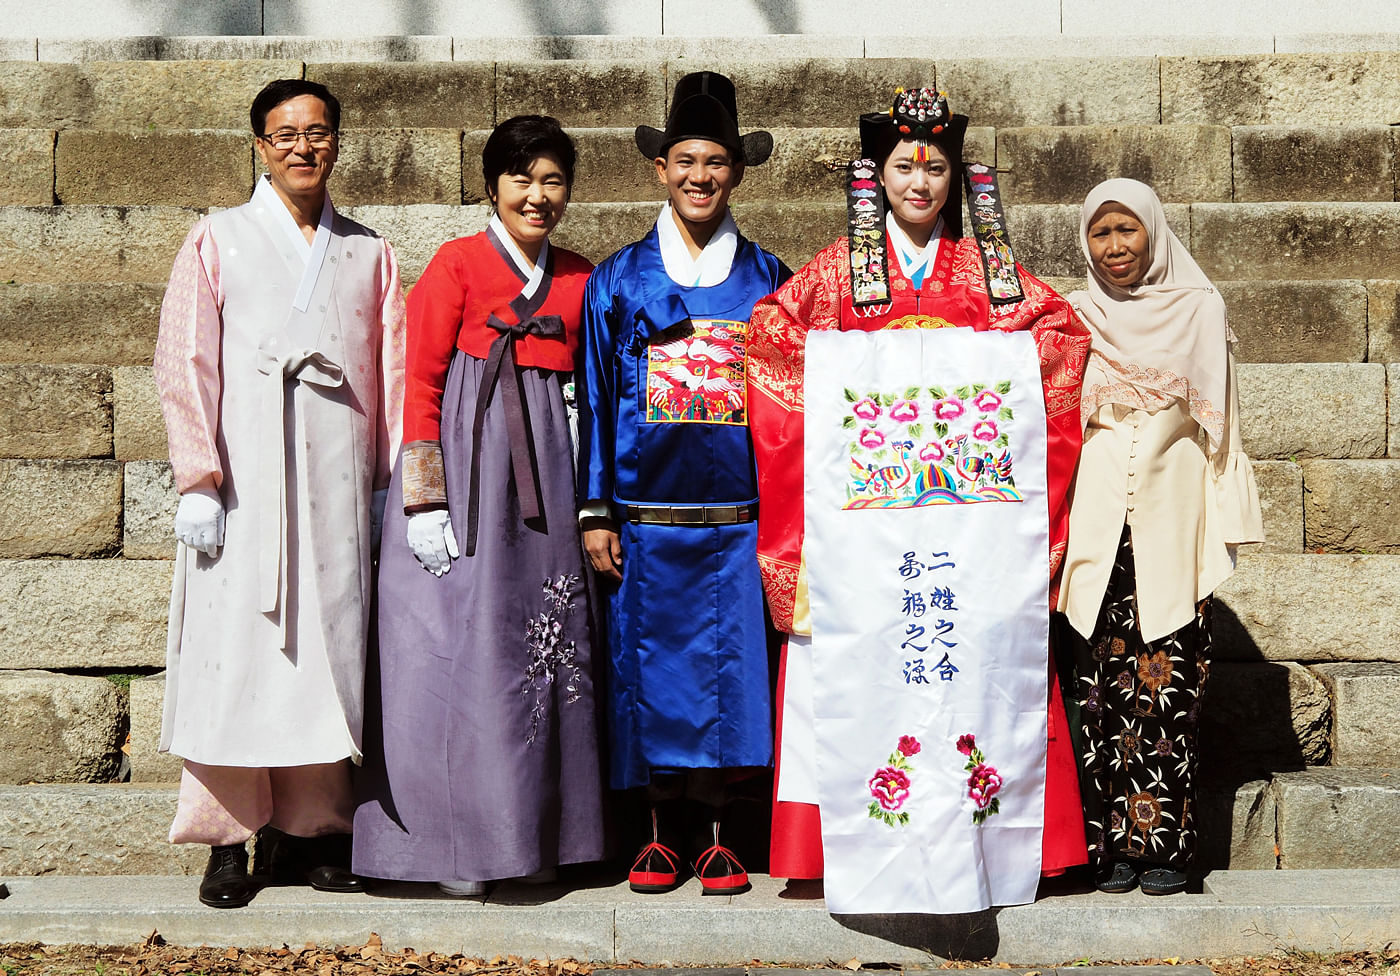 lee-seul-with-her-malaysian-husband-muhamad-khalid-bin-ismail-and-their-family-at-their-traditional-korean-wedding.jpg